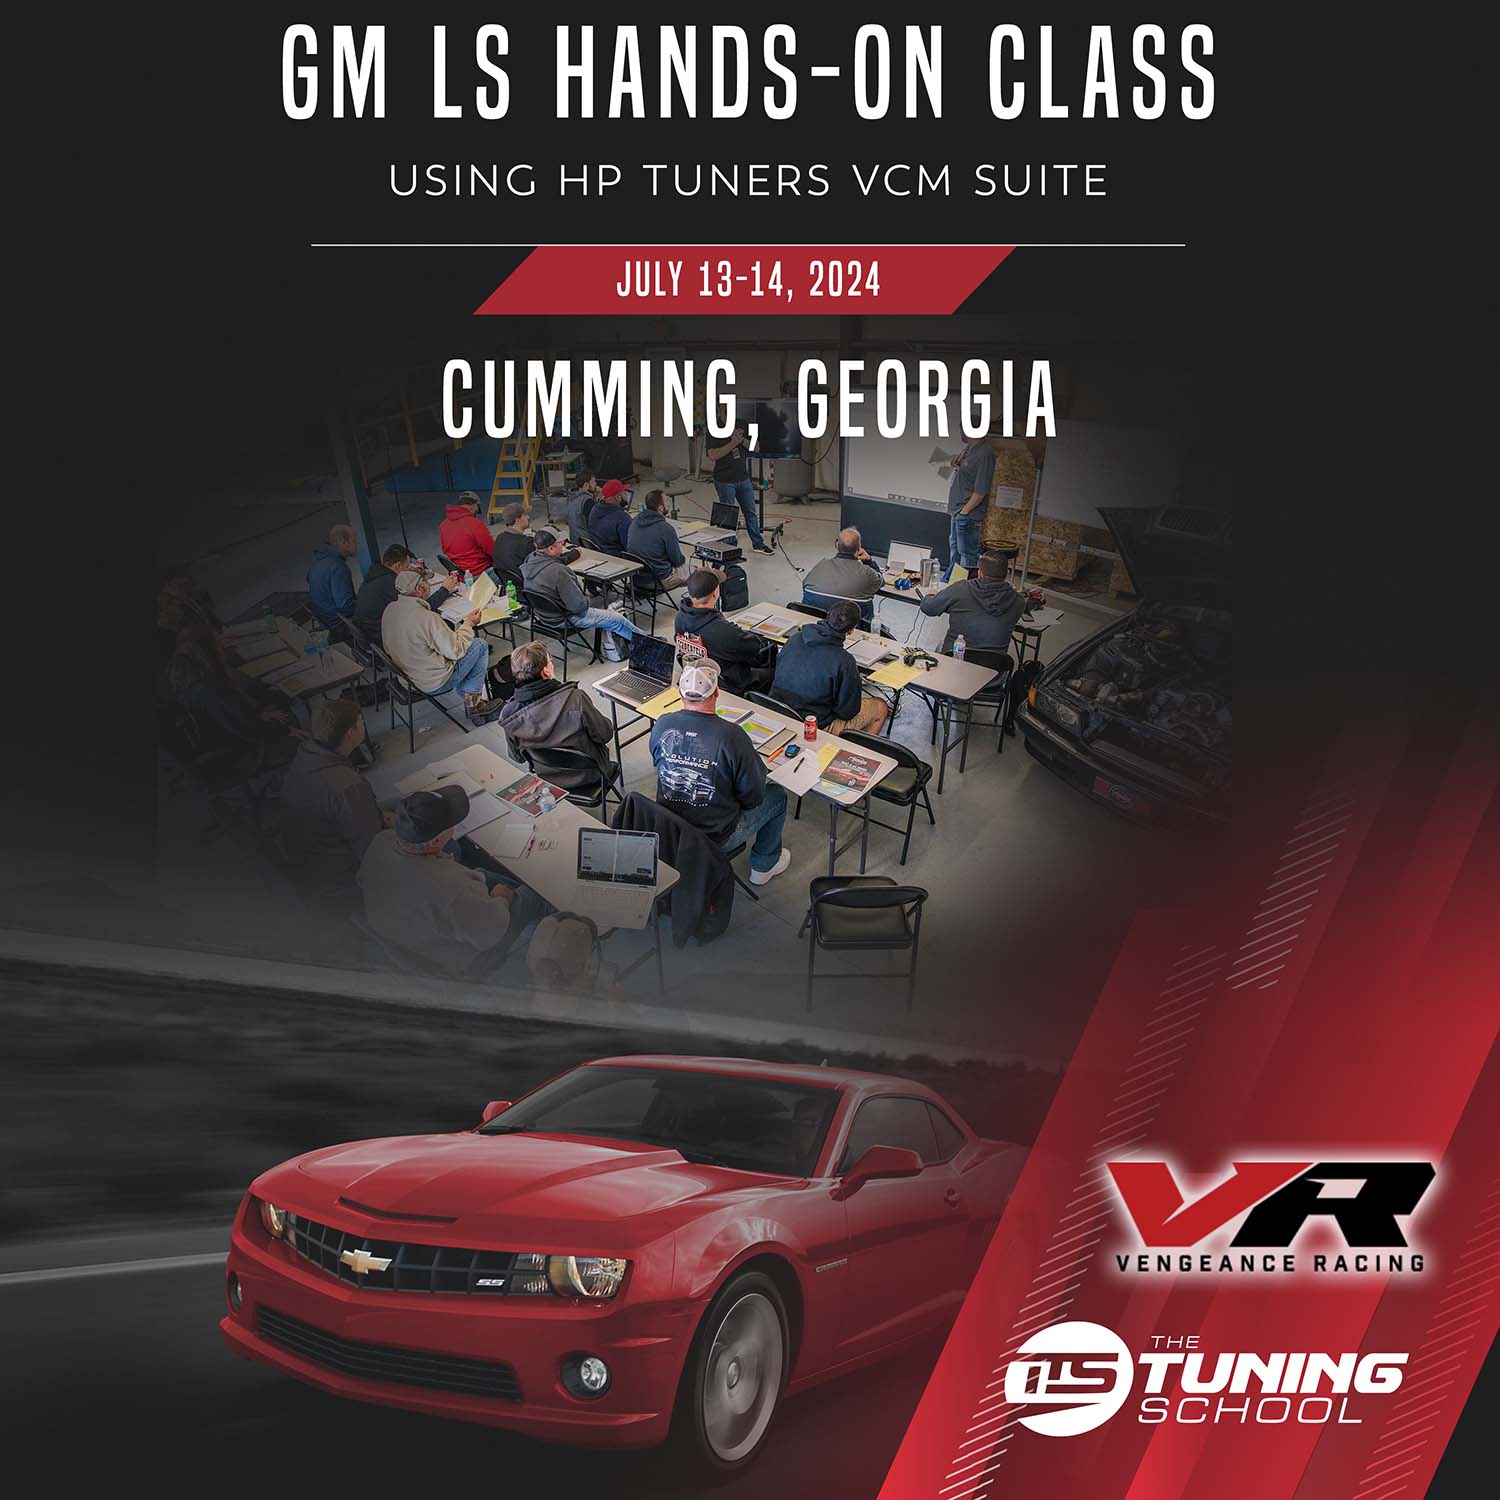 GM LS Engine Hands-On Class using HP Tuners - Cumming, GA July 13-14, 2024 NO PRINTED COURSE